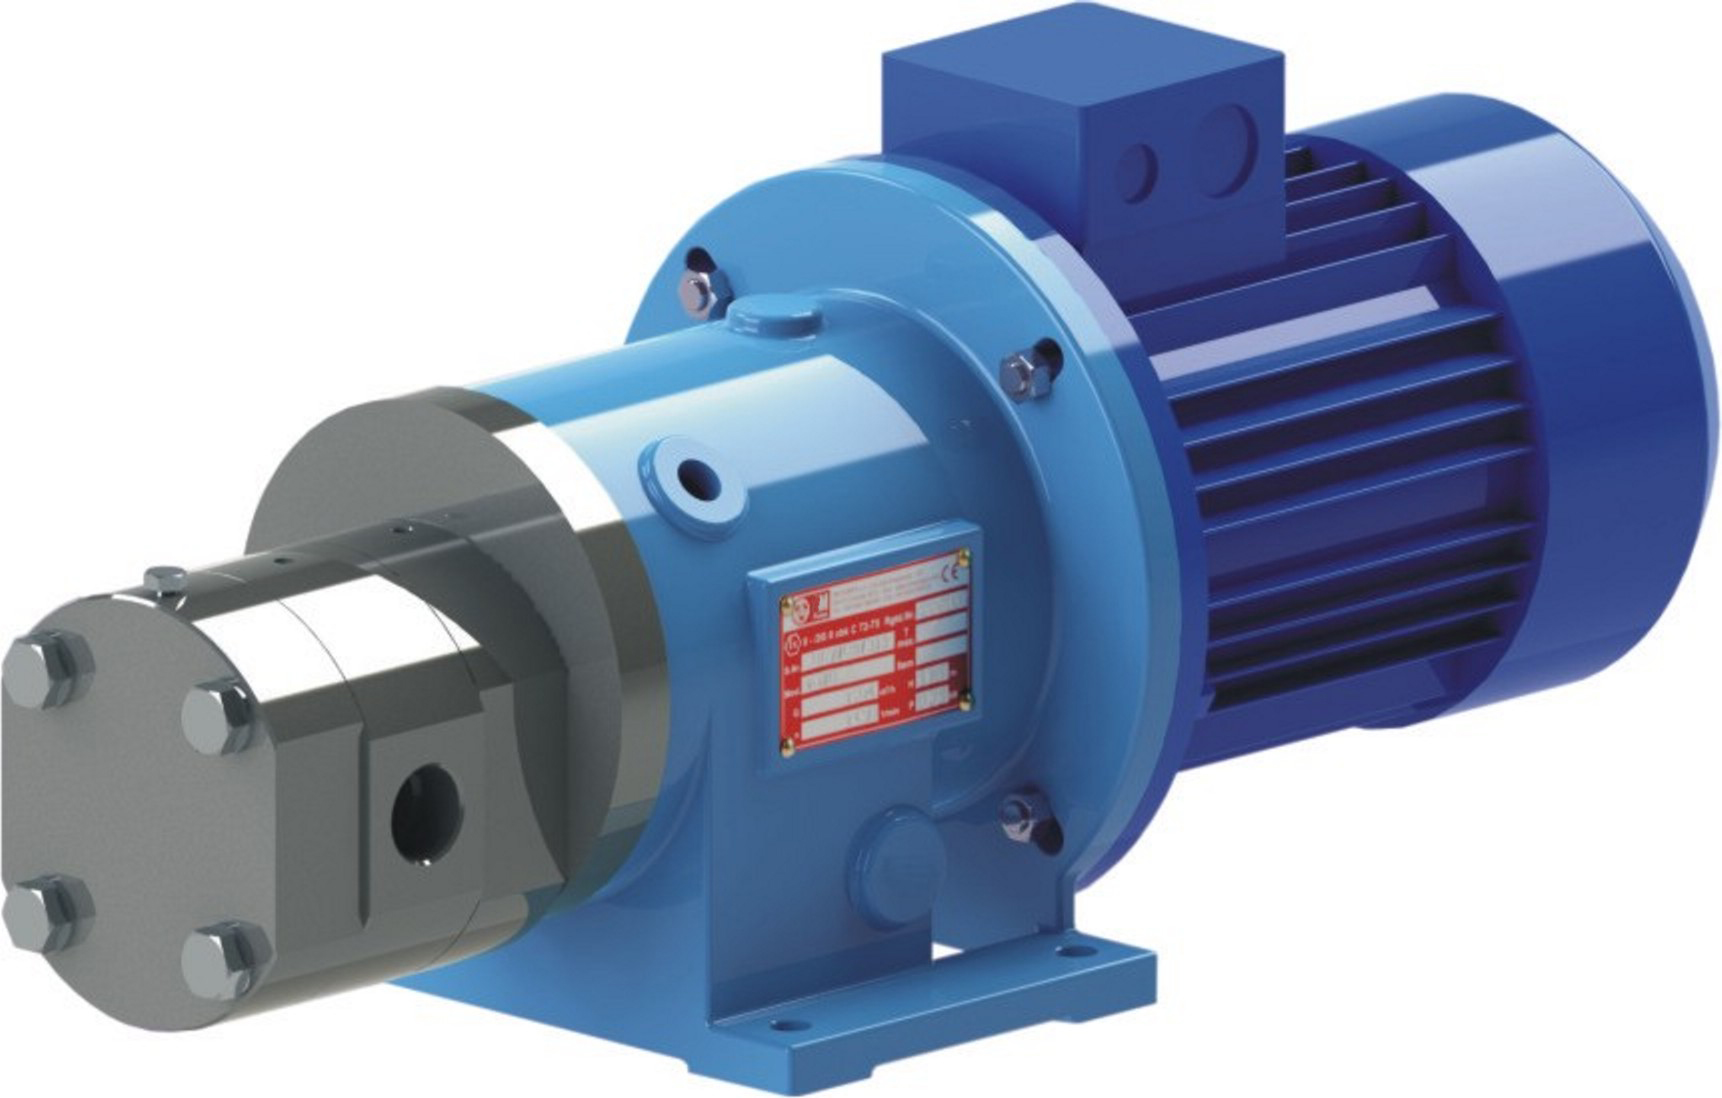 Gear Pumps Market Growth Overview and Revenue Analysis With Top Players 2021-2028 | Viking Pump, Haight Pumps (Baker), SPX FLOW, Voith